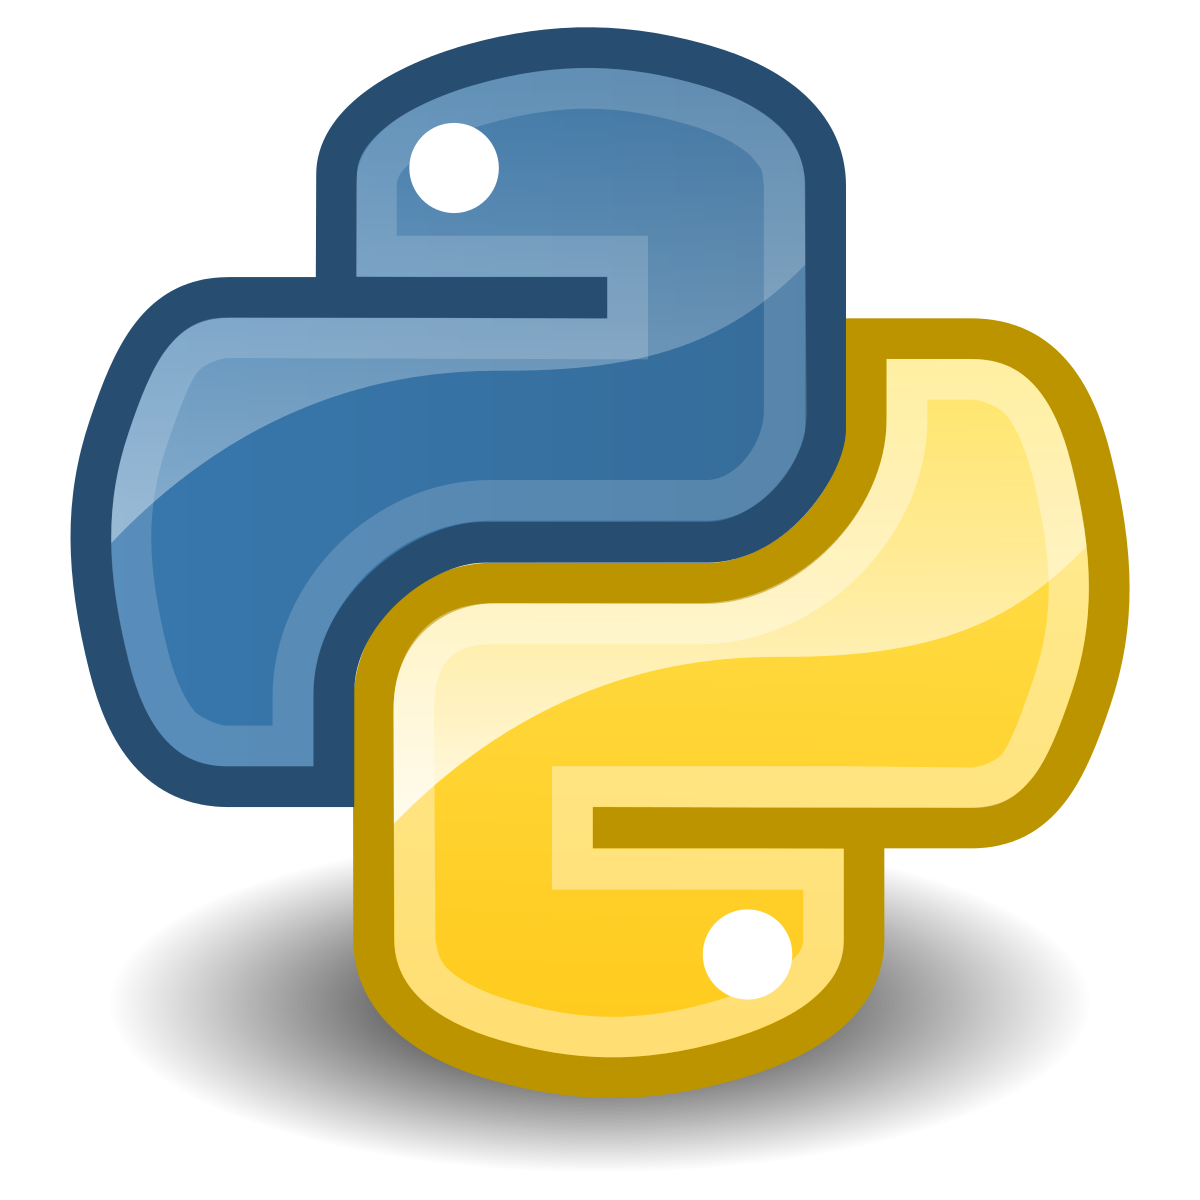 Be a Master at Python Through Some Cool Code Snippets